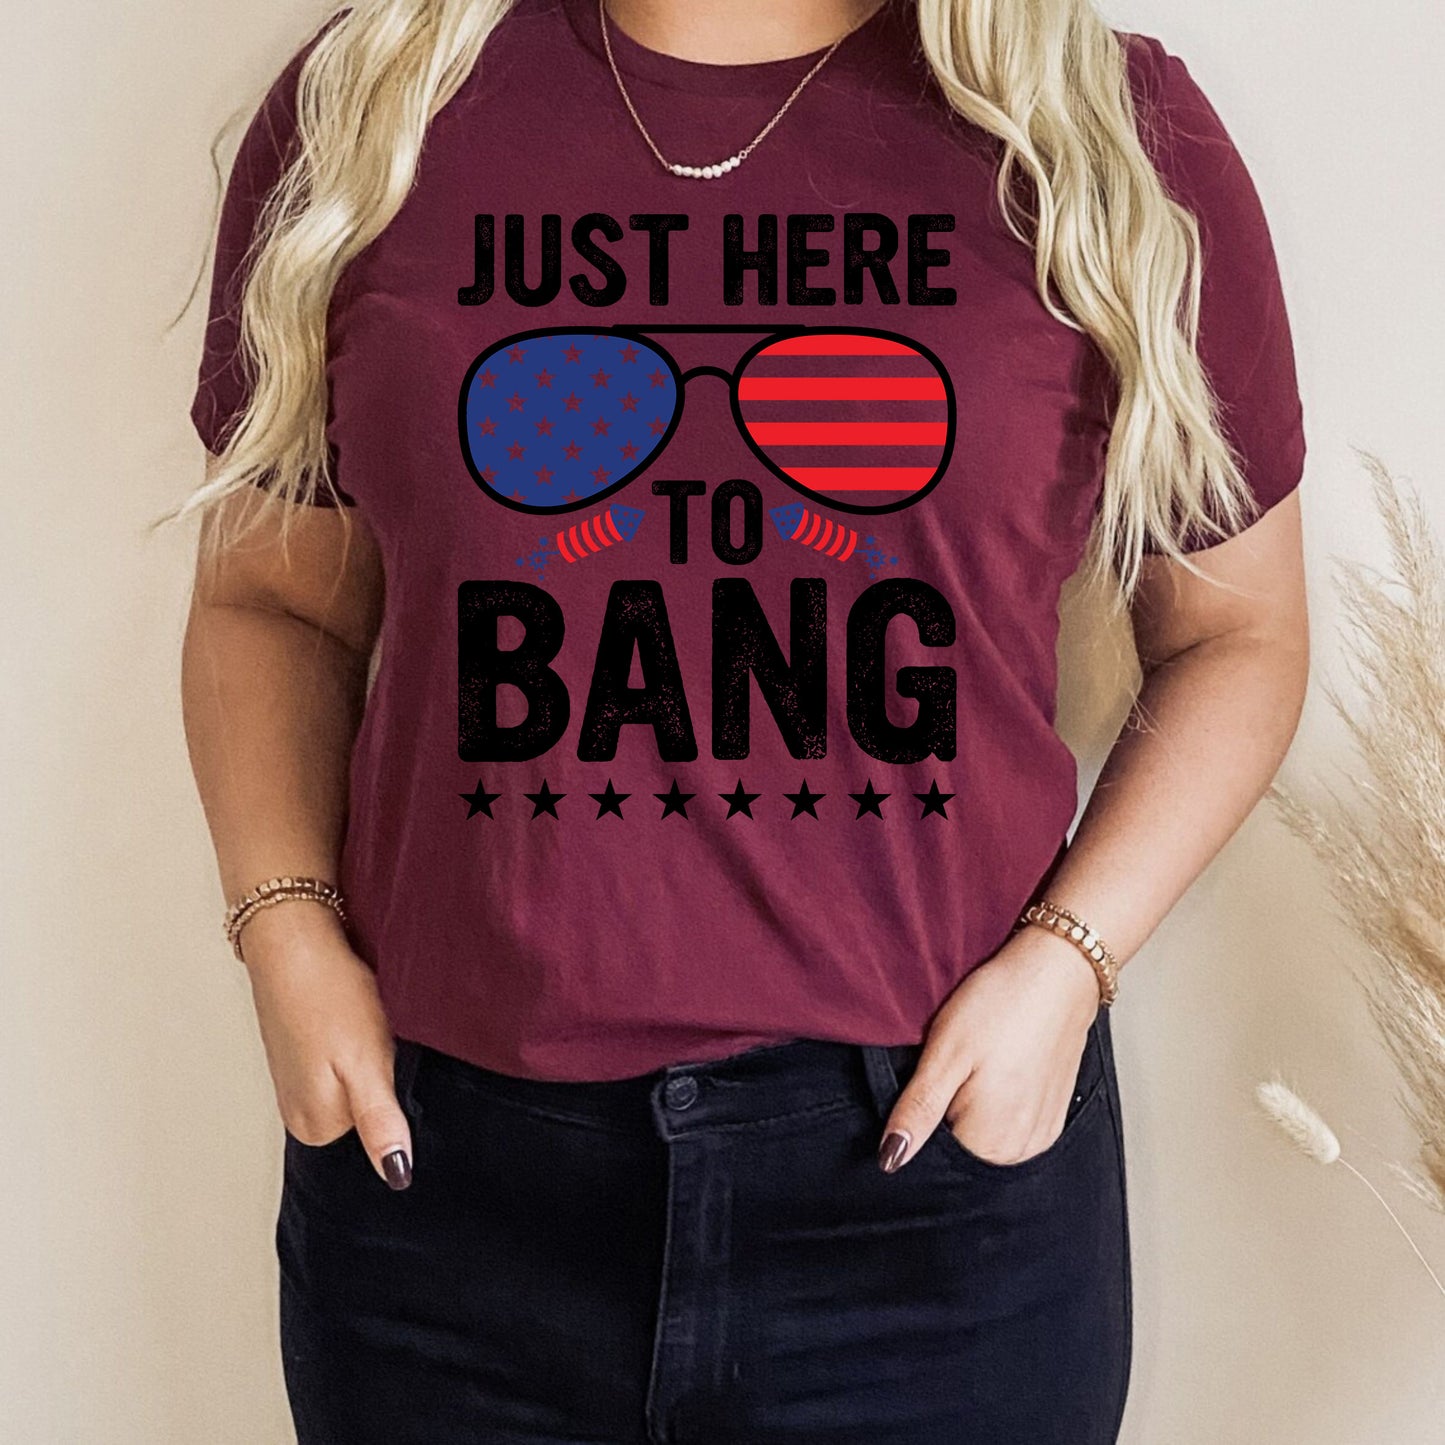 Just Here To Bang American Patriotic Party USA Independence Day Tshirt